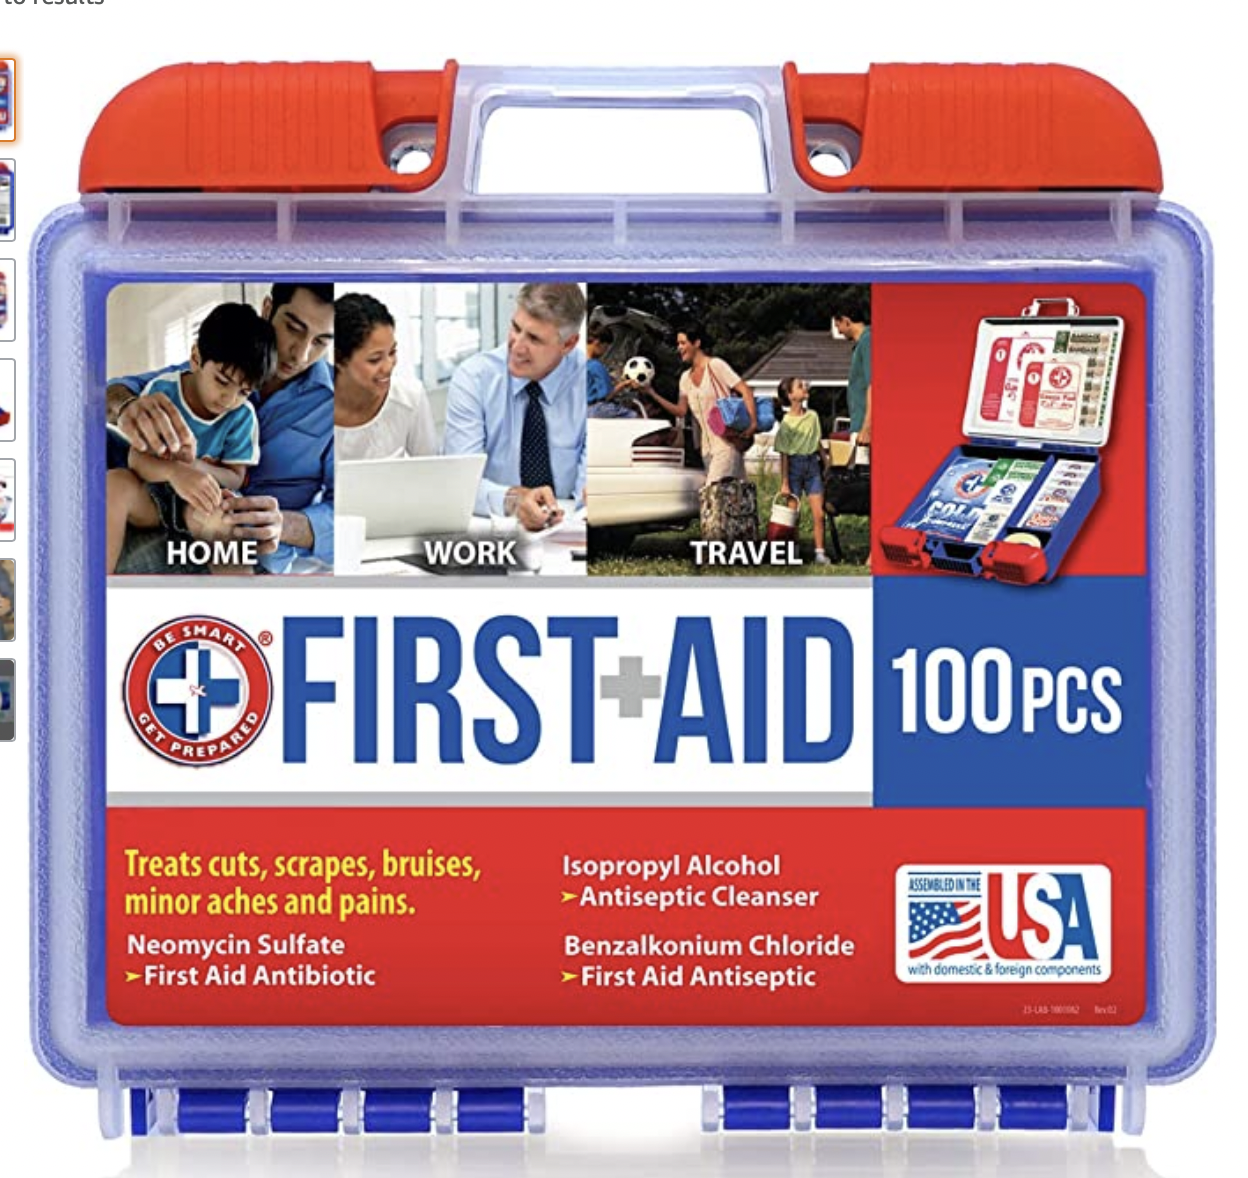 Be Smart Get Prepared 100 Piece First Aid Kit: Clean, Treat, Protect Minor Cuts, Scrapes. Home, Office, Car, School, Business, Travel, Emergency, Survival, Hunting, Outd